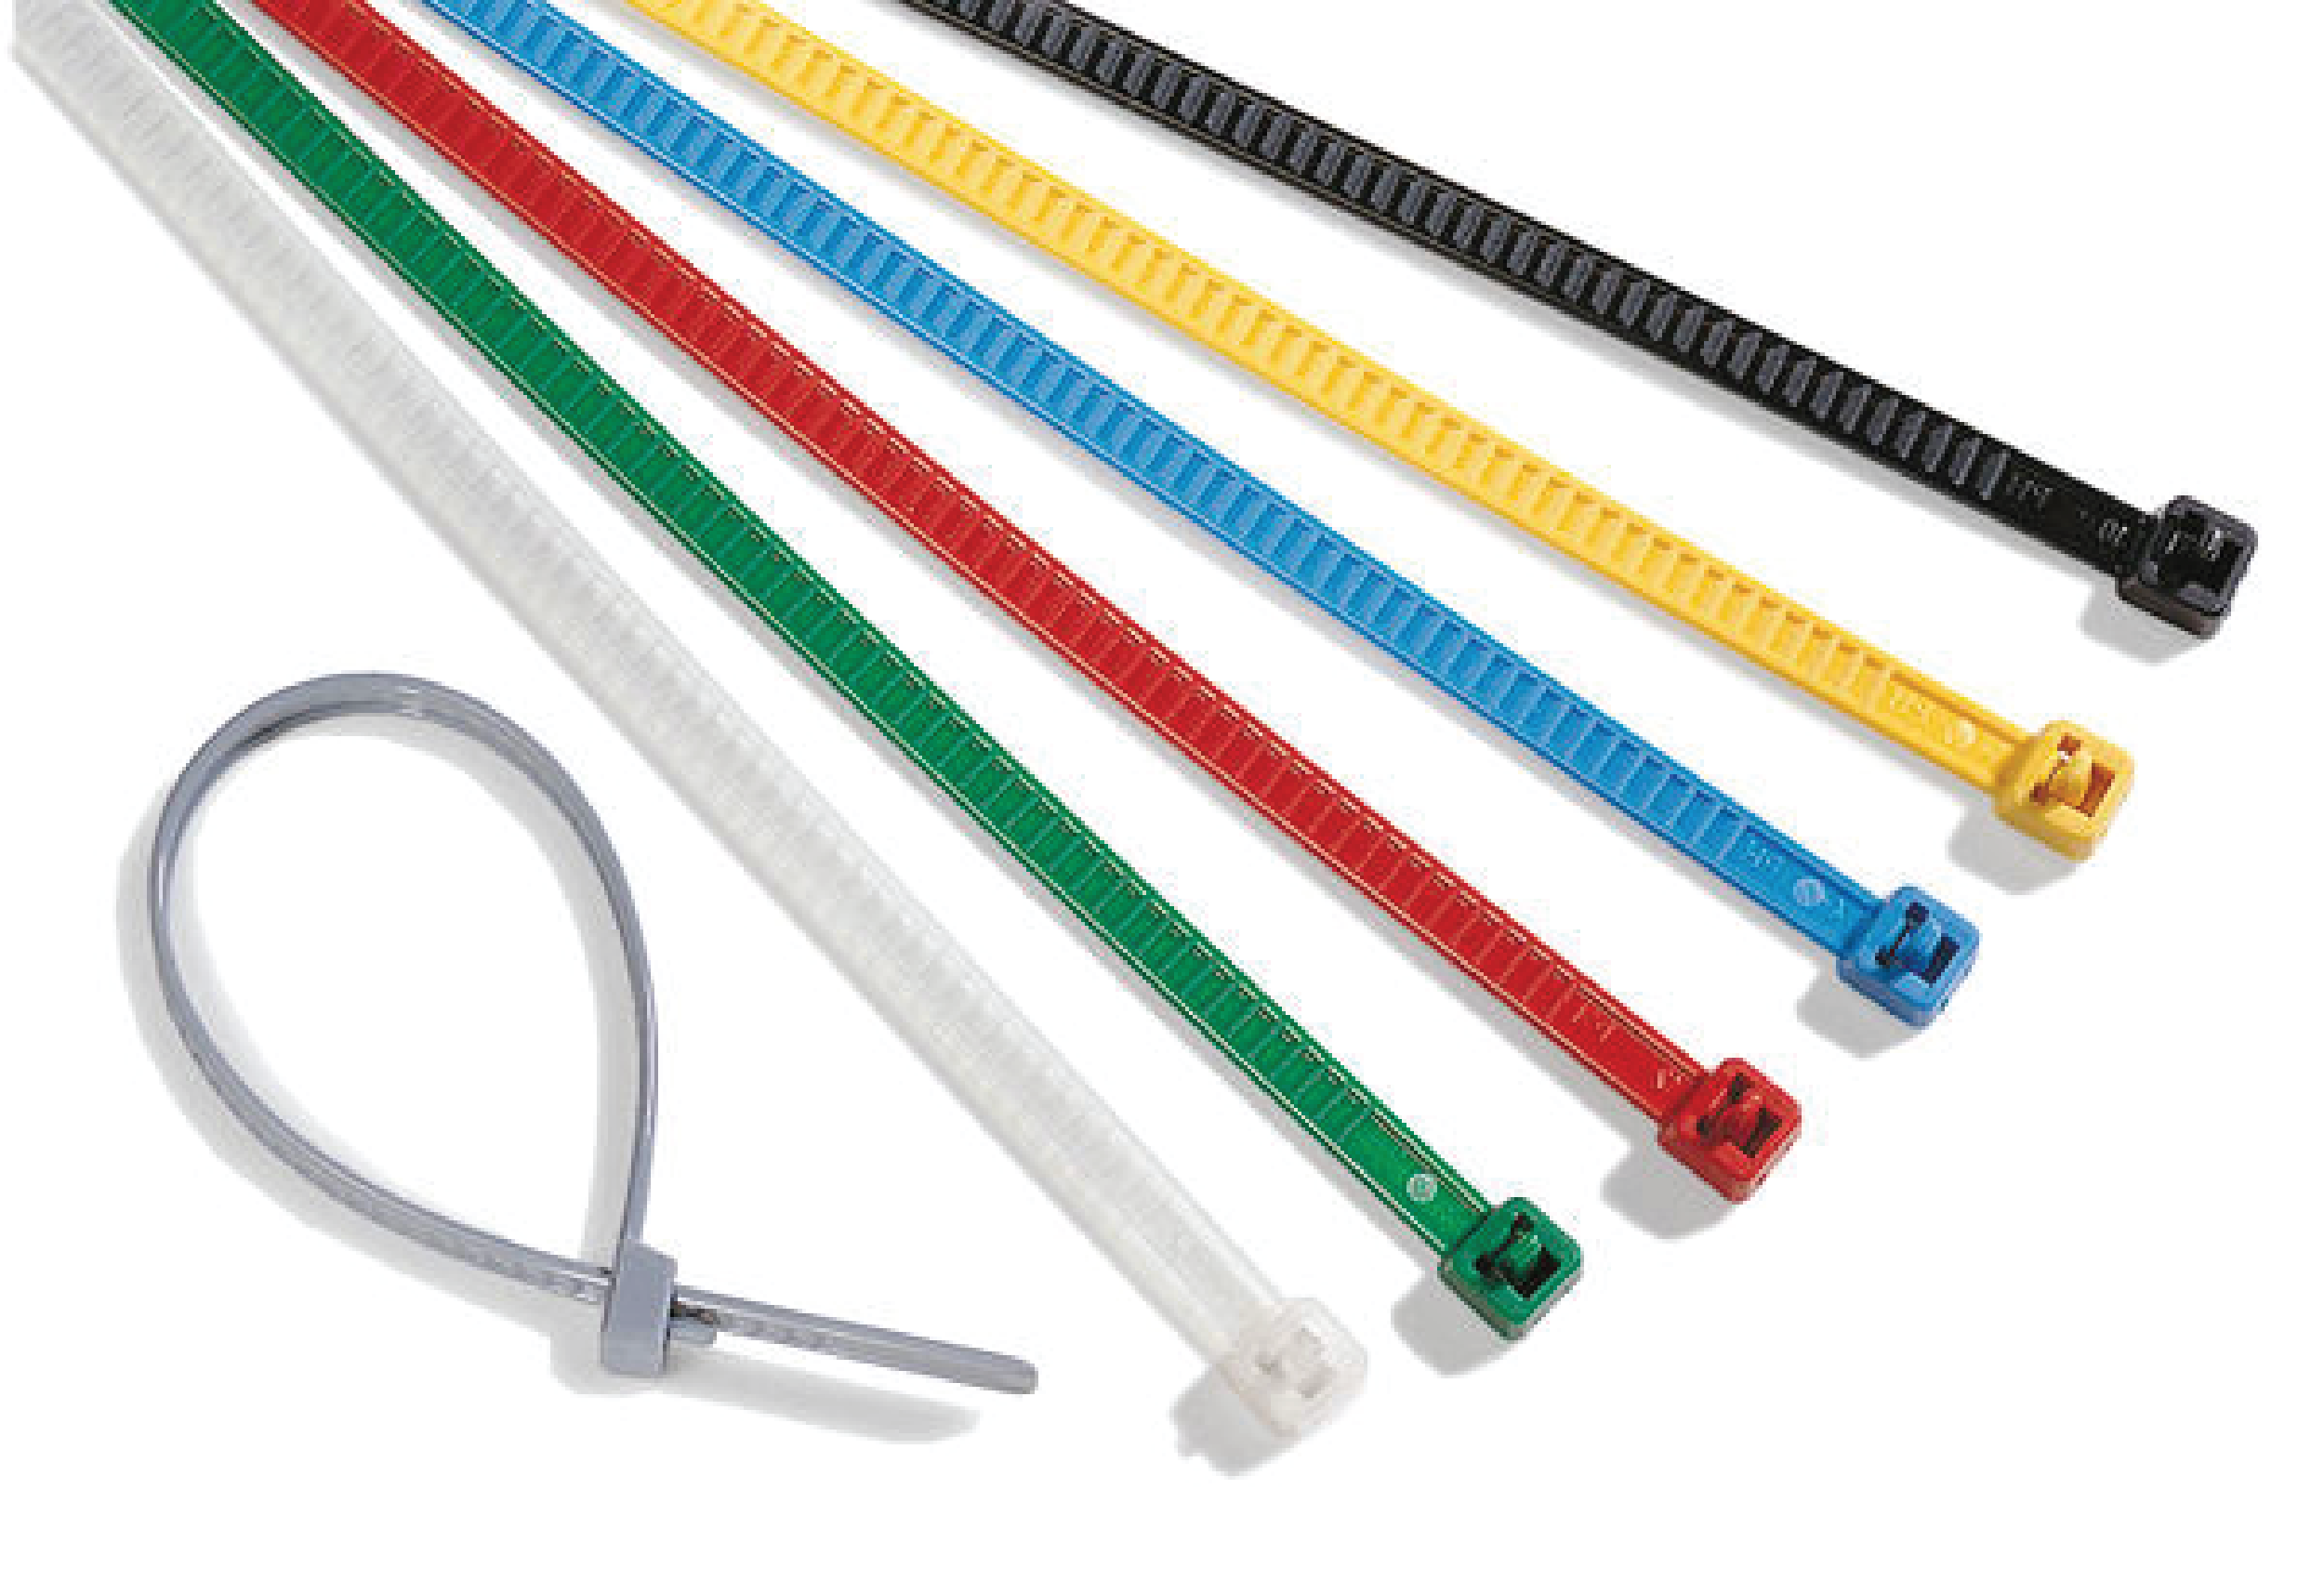 Scott Electric HellermannTyton cable ties